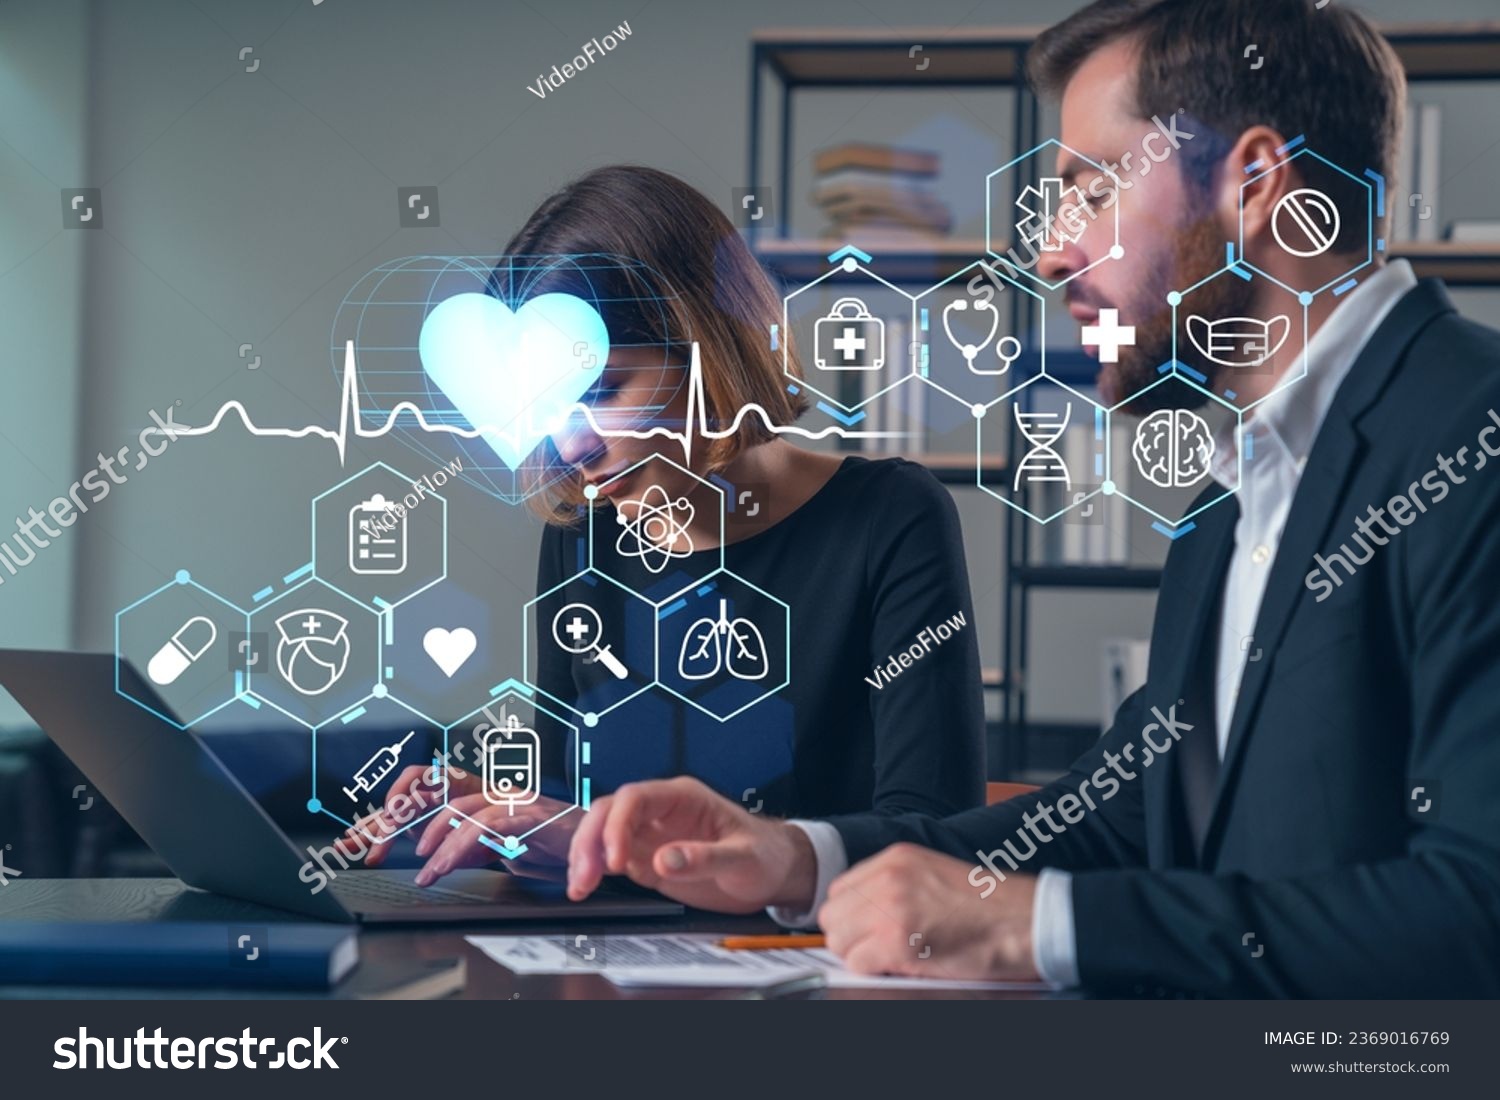 Thoughtful businesspeople typing on laptop at office workplace. Concept of team work, business education, internet surfing, brainstorm, project information technology. Medical healthcare hologram #2369016769